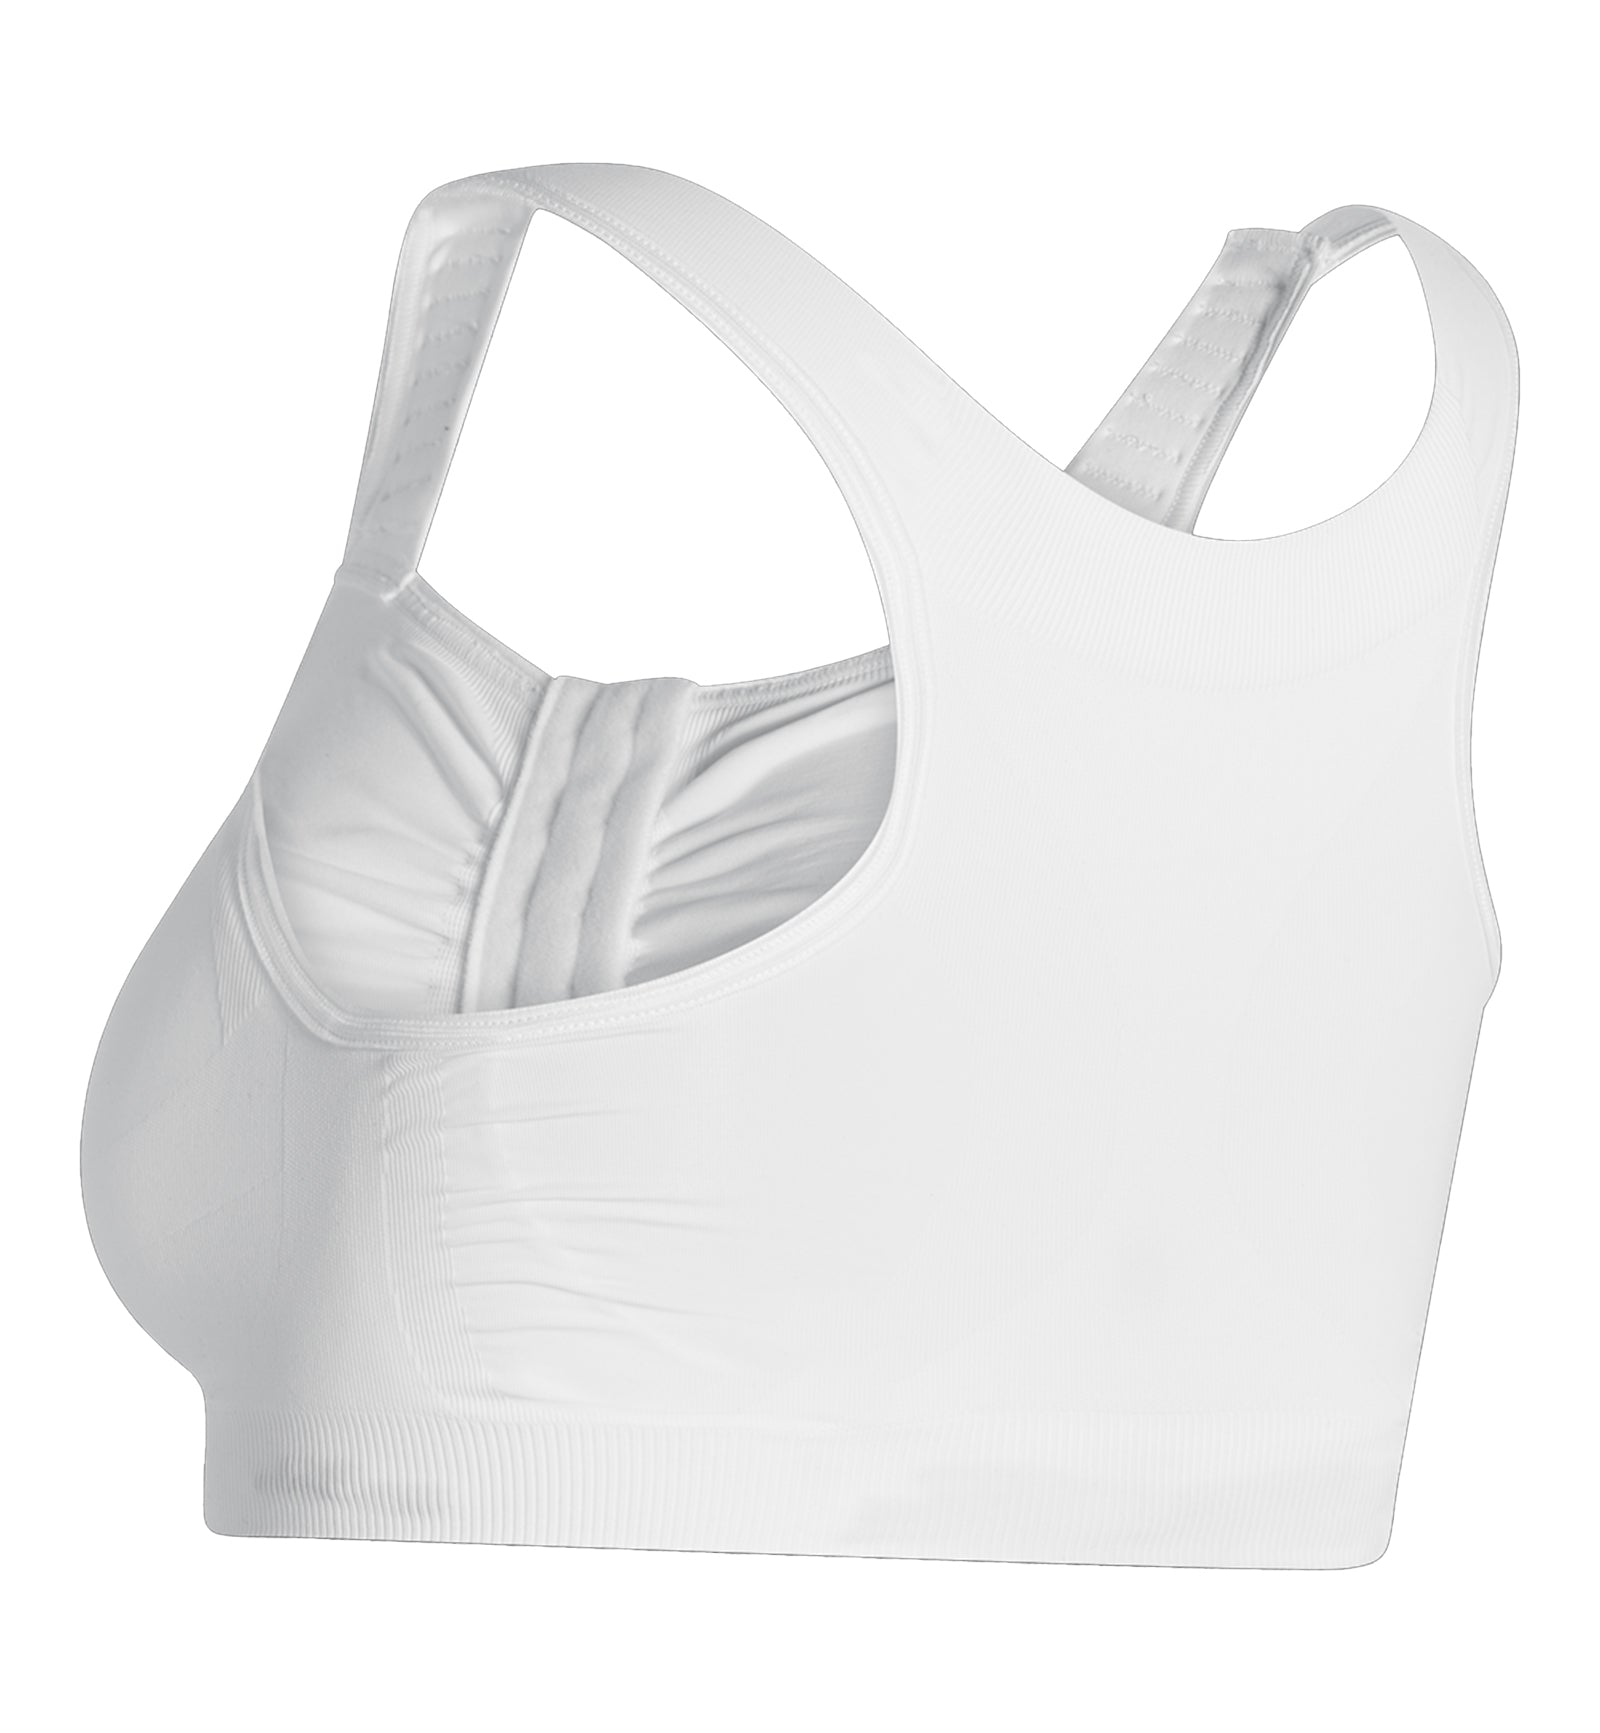 Carefix Mary Front Close Post-Op Bra #3343, Nude, Small 